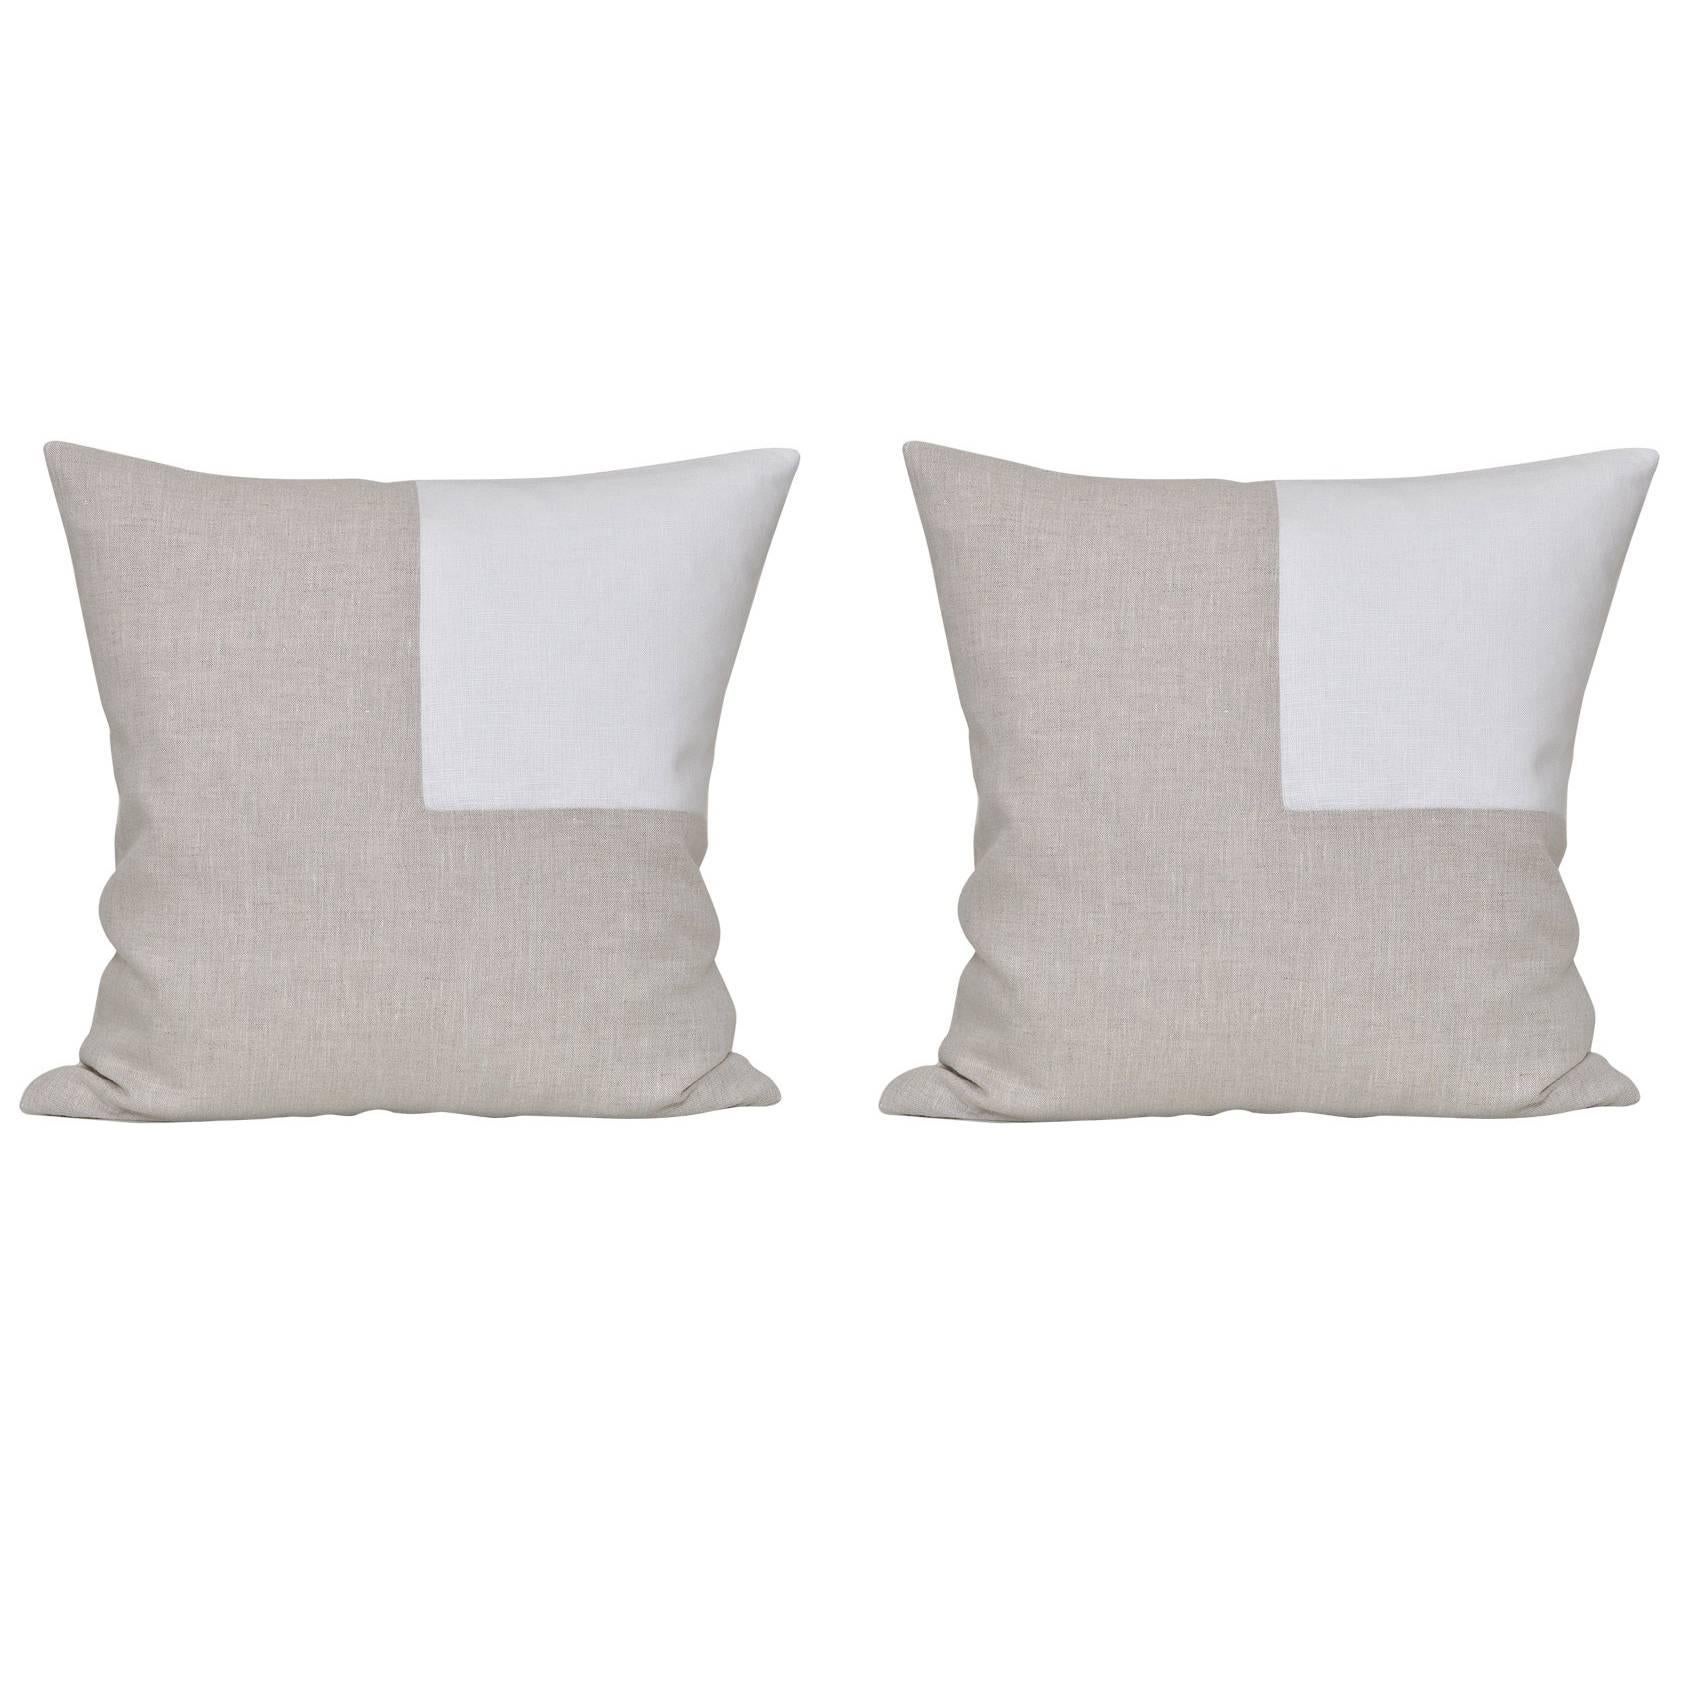 Pair of Large Contemporary Natural Irish Linen Pillow with Vintage White Patch For Sale